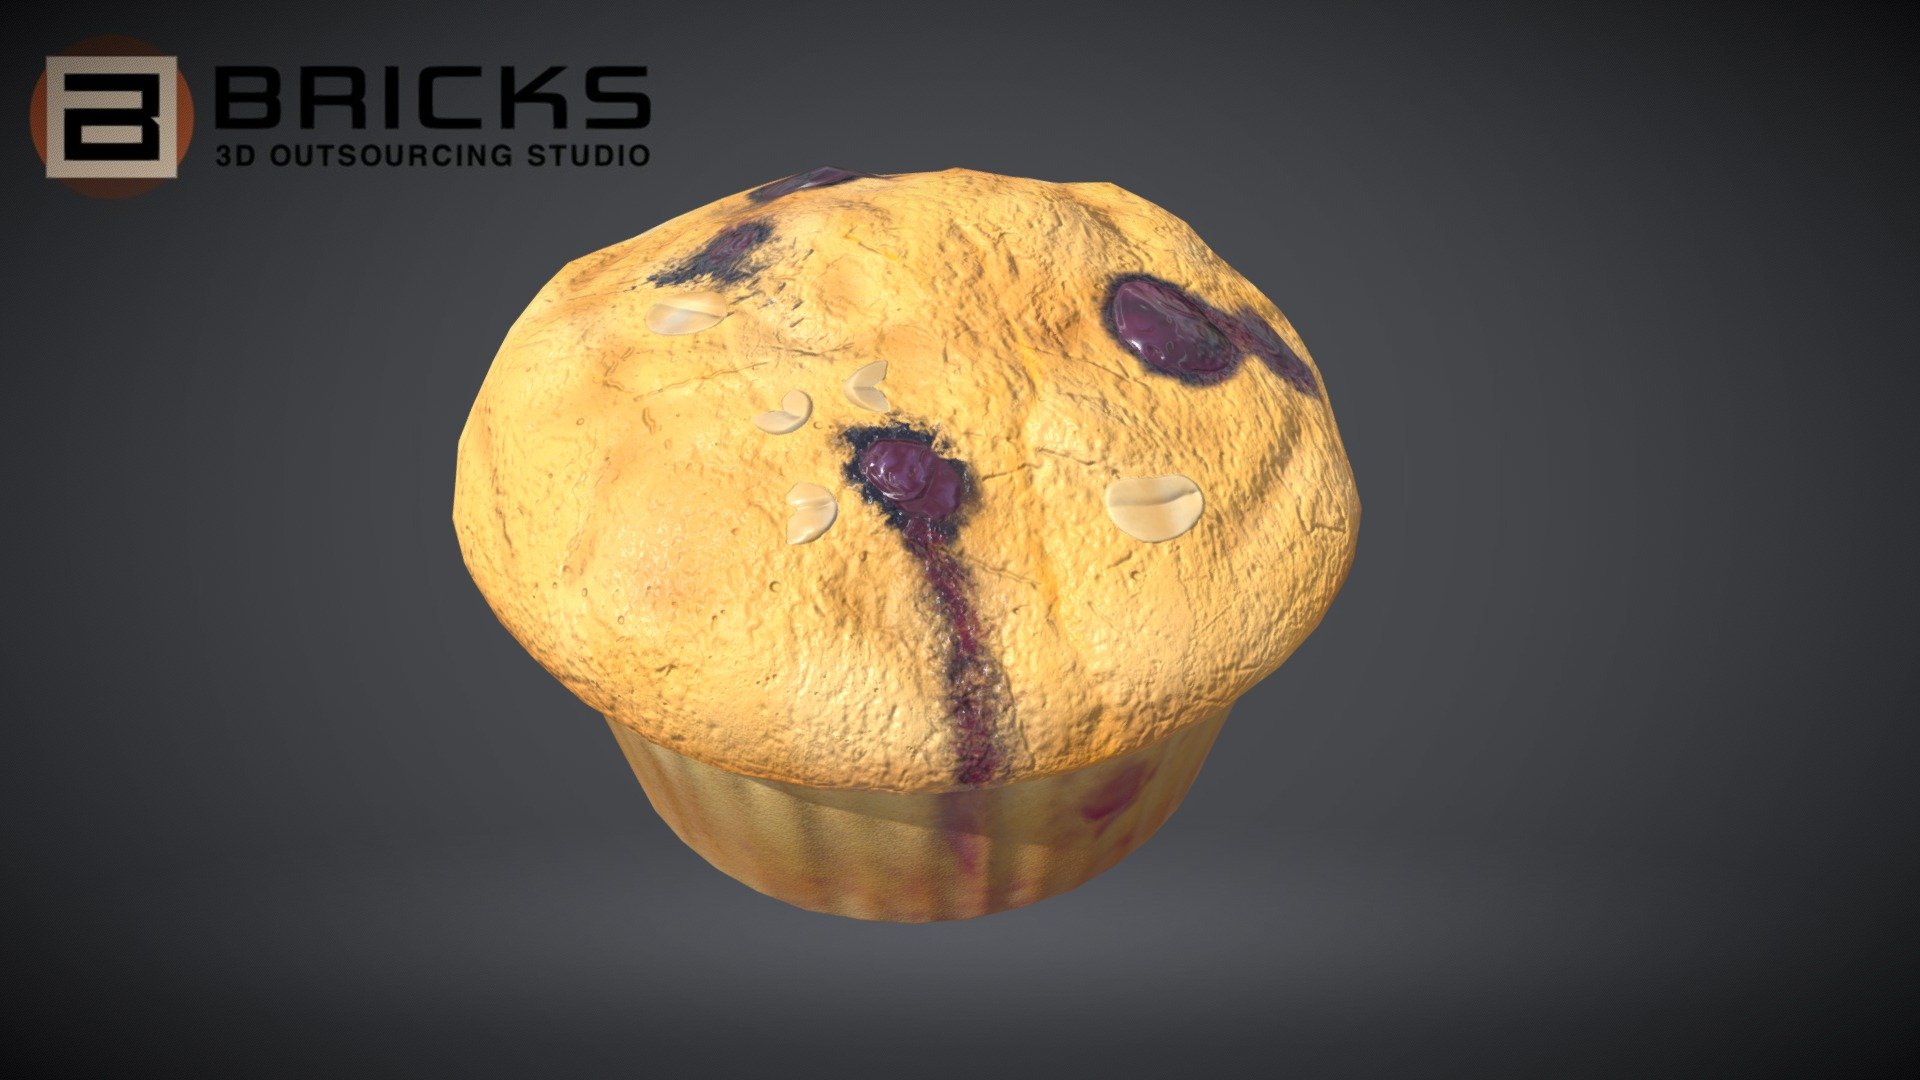 PBR Food Asset:
BlueberryMuffin
Polycount: 1200
Vertex count: 699
Texture Size: 2048px x 2048px
Normal: OpenGL

If you need any adjust in file please contact us: team@bricks3dstudio.com

Hire us: tringuyen@bricks3dstudio.com
Here is us: https://www.bricks3dstudio.com/
        https://www.artstation.com/bricksstudio
        https://www.facebook.com/Bricks3dstudio/
        https://www.linkedin.com/in/bricks-studio-b10462252/ - Blueberry Muffin - Buy Royalty Free 3D model by Bricks Studio (@bricks3dstudio) 3d model